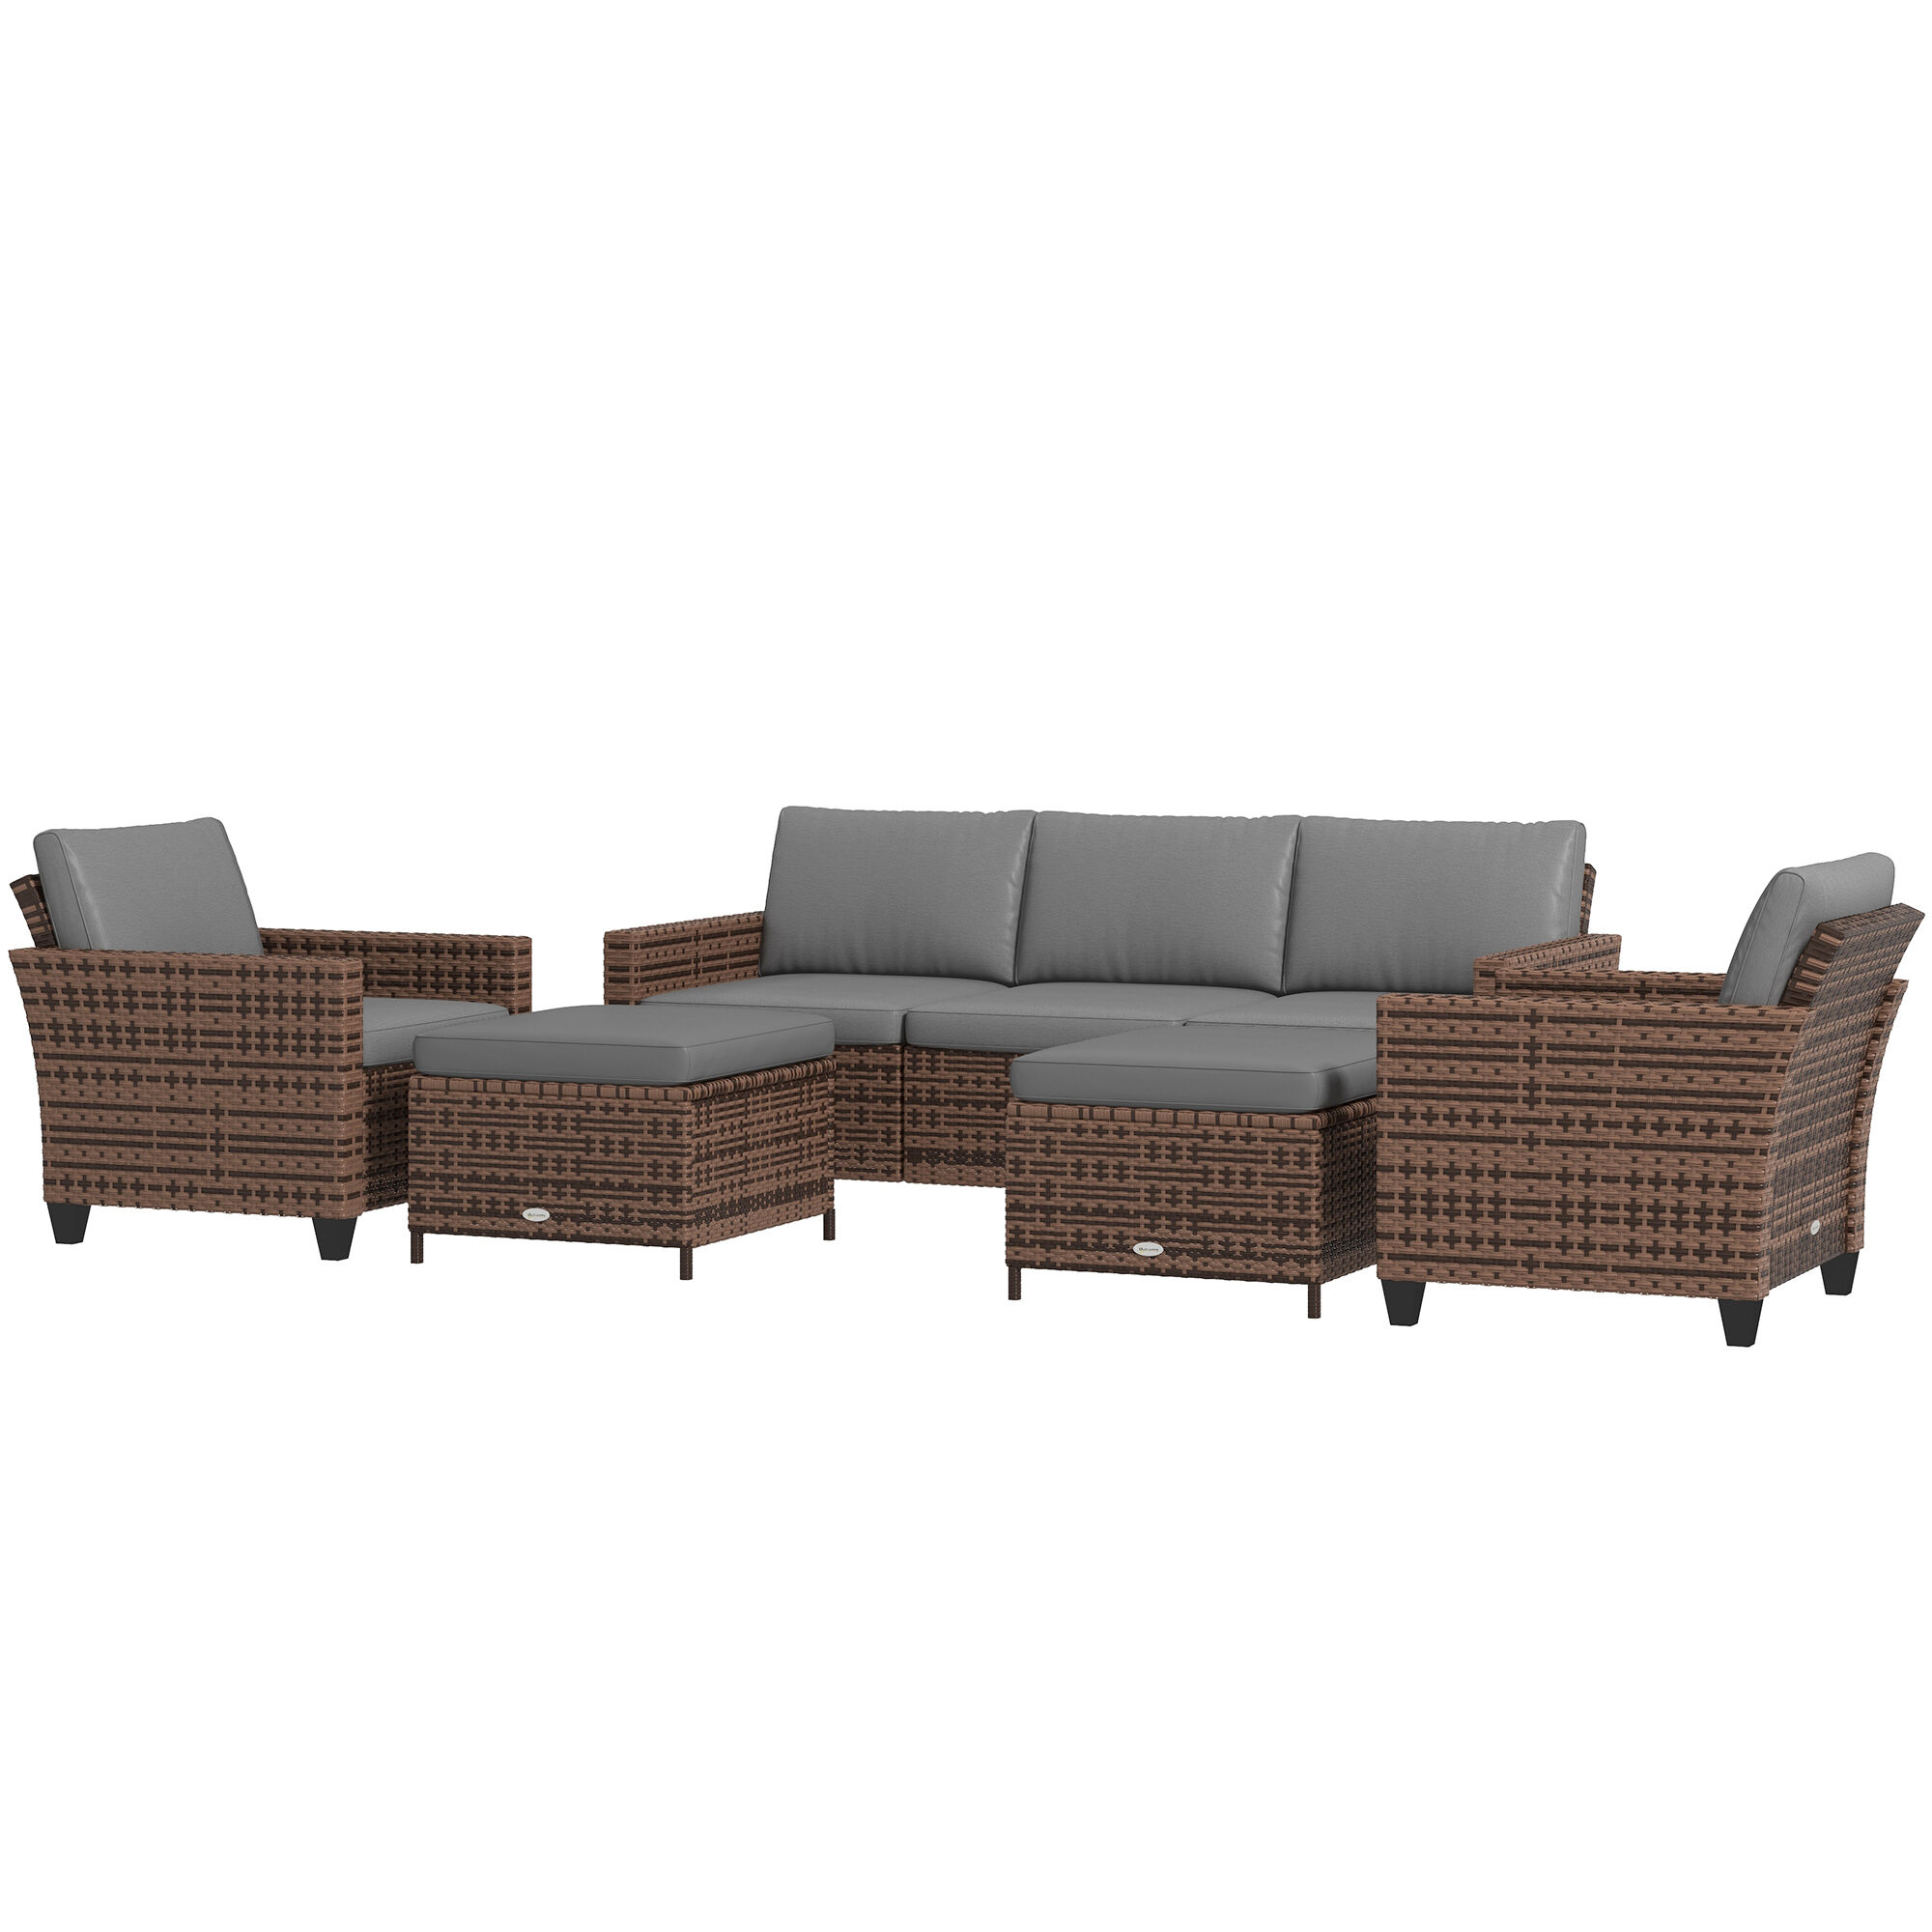 Outsunny 5-Piece Patio Furniture Set with PE Rattan Three-Seater Sofa, Armchairs, Footstools, Cushions, Mixed Brown